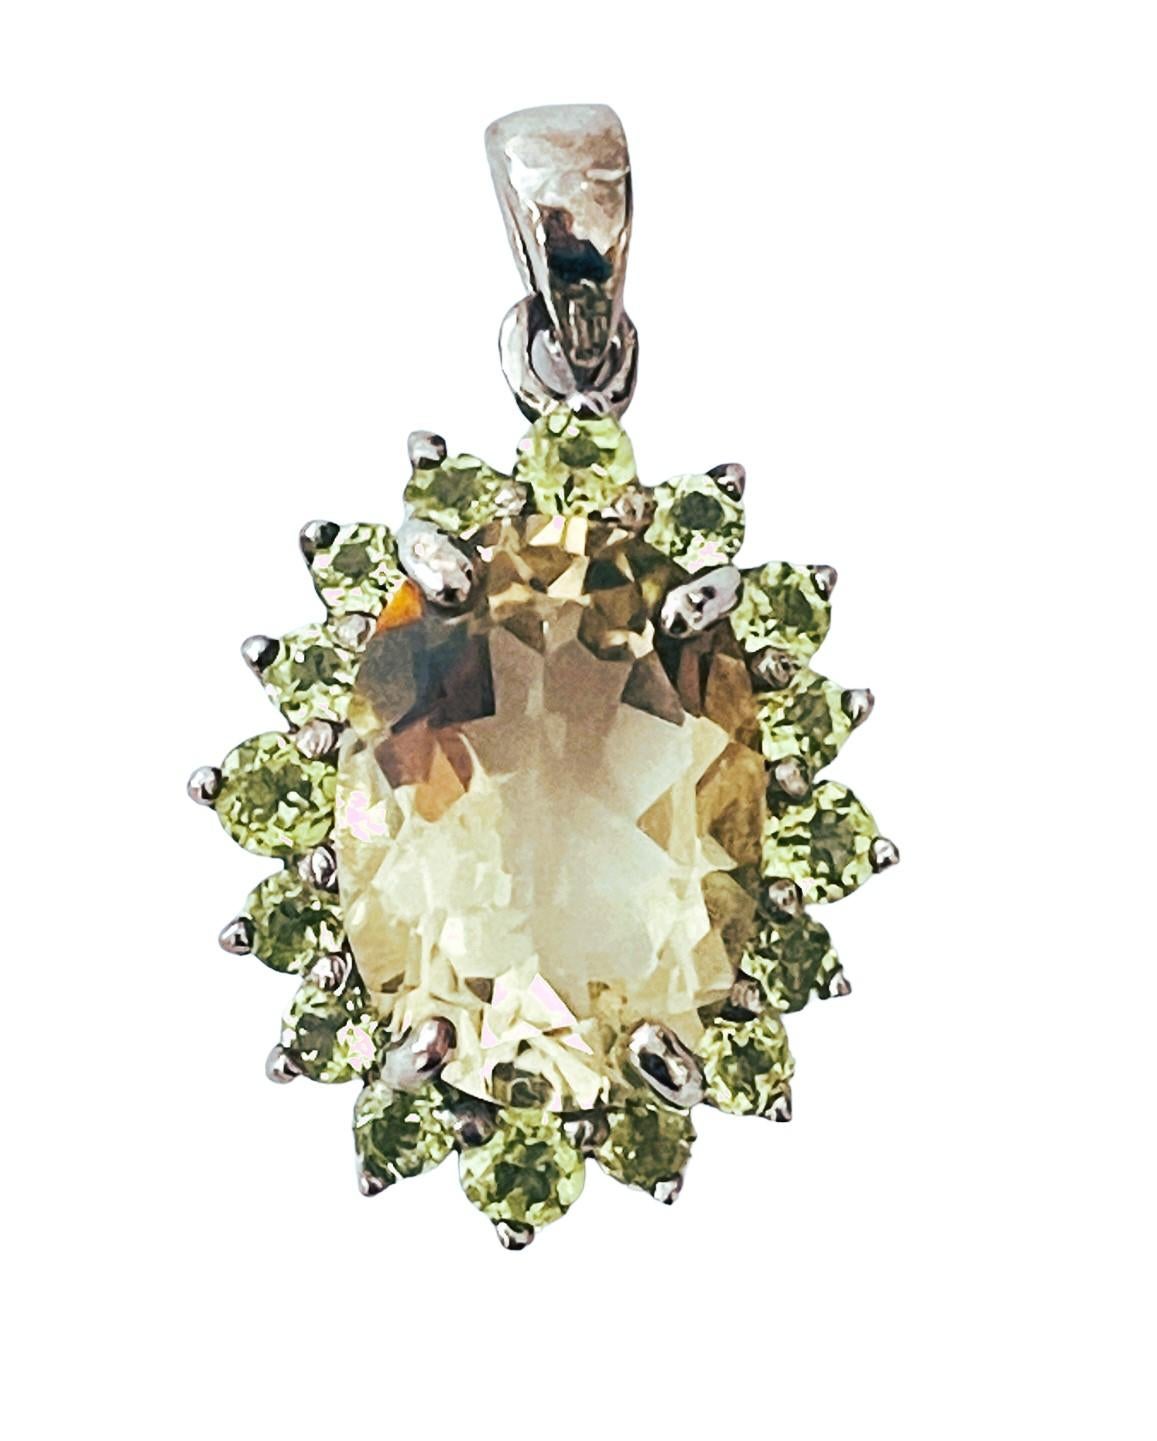 This pendant is just so beautiful!  The stone is from Brazil and is just exquisite.  It is an oval cut and is 5.81 Ct   The main stone is 14 x 10 mm and is surrounded by diamond cut green Peridot stones. The pendant itself is 1.13 inch long and .68